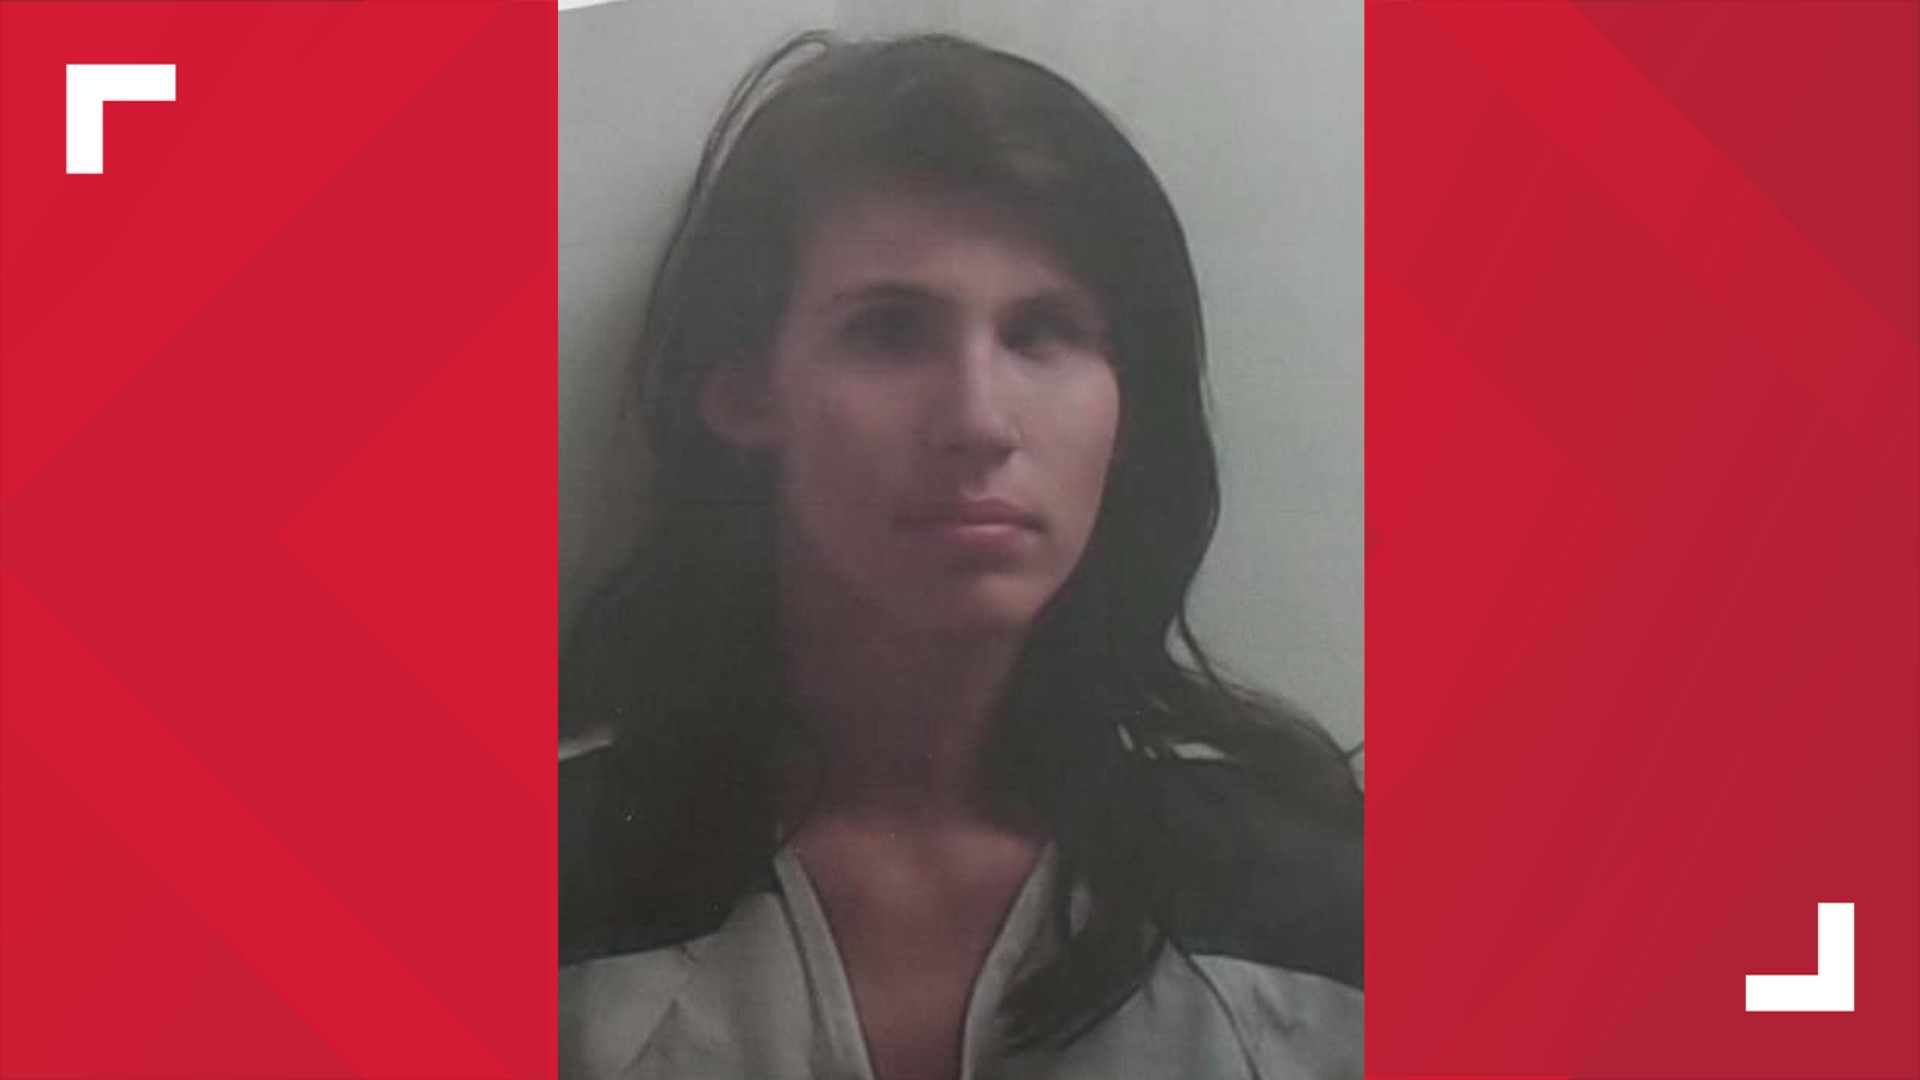 They are looking for 26-year-old Haley Elizabeth Andrus, who is also known as Haley Gibson.